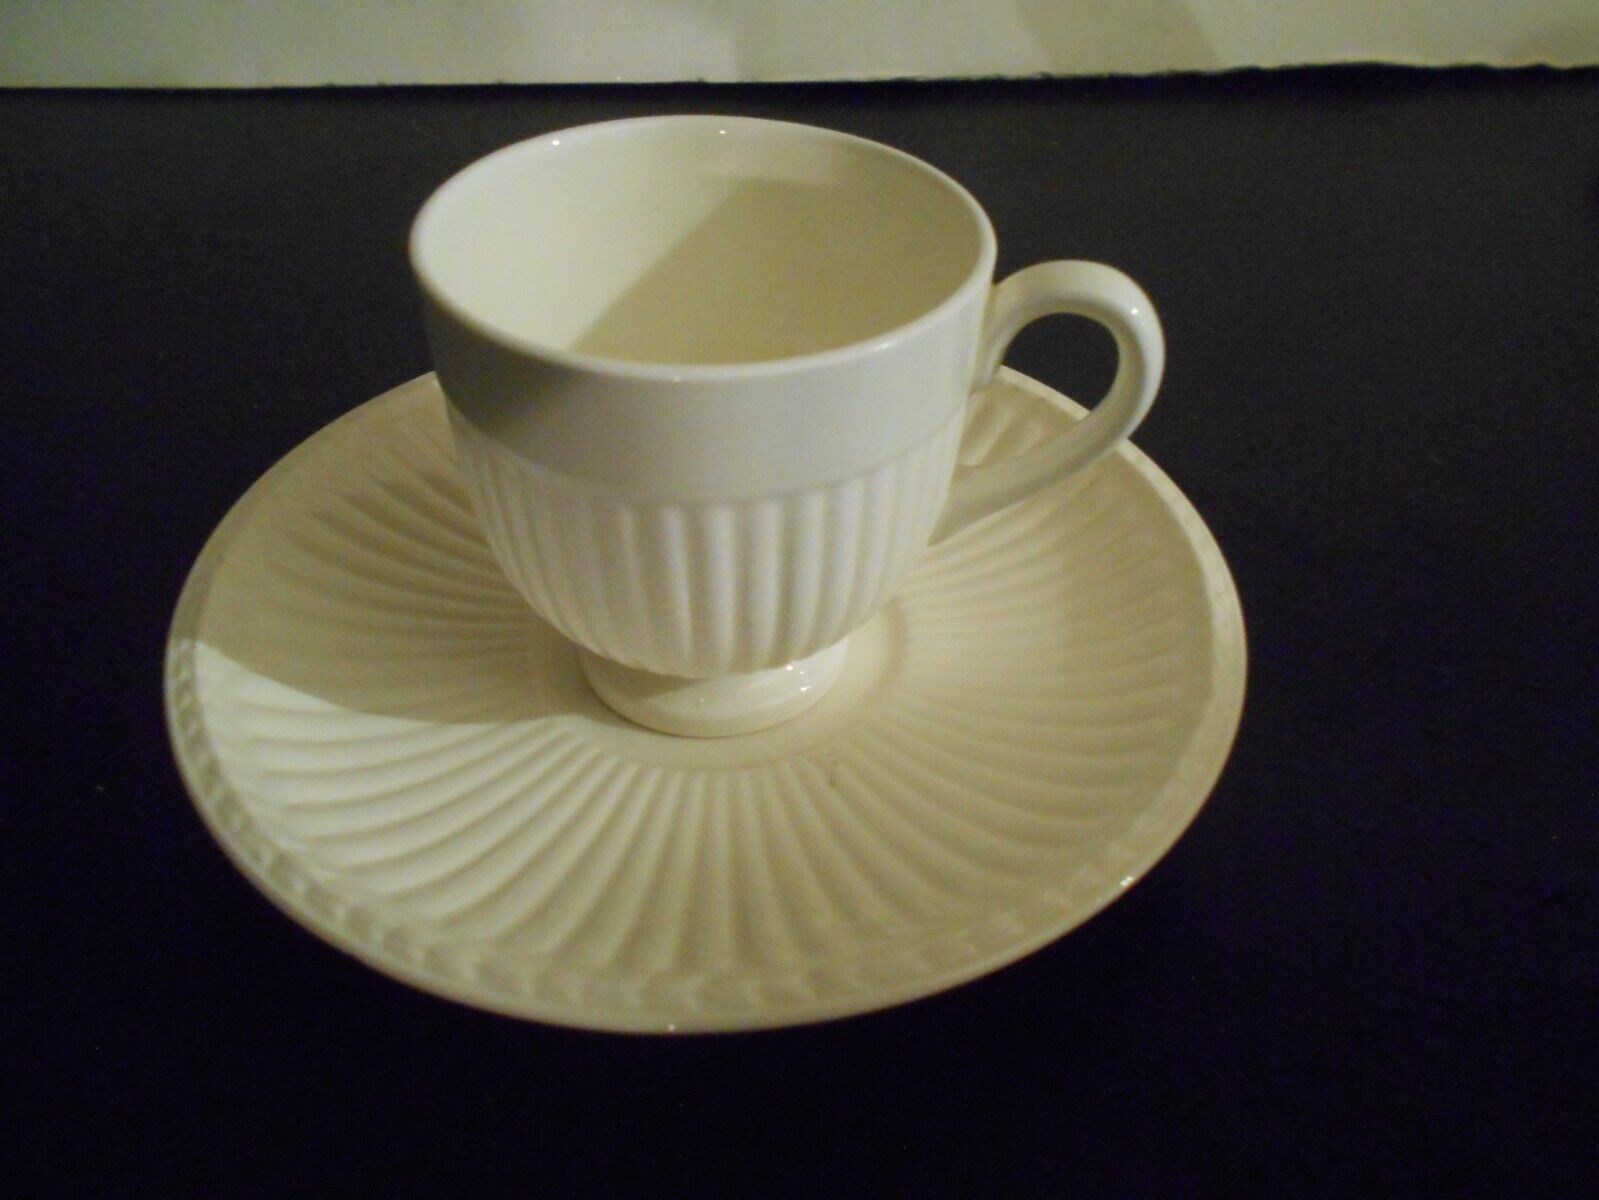 Primary image for Wedgwood Etruria & Barlaston England Edme Cream Footed Demitassie Cup and Saucer